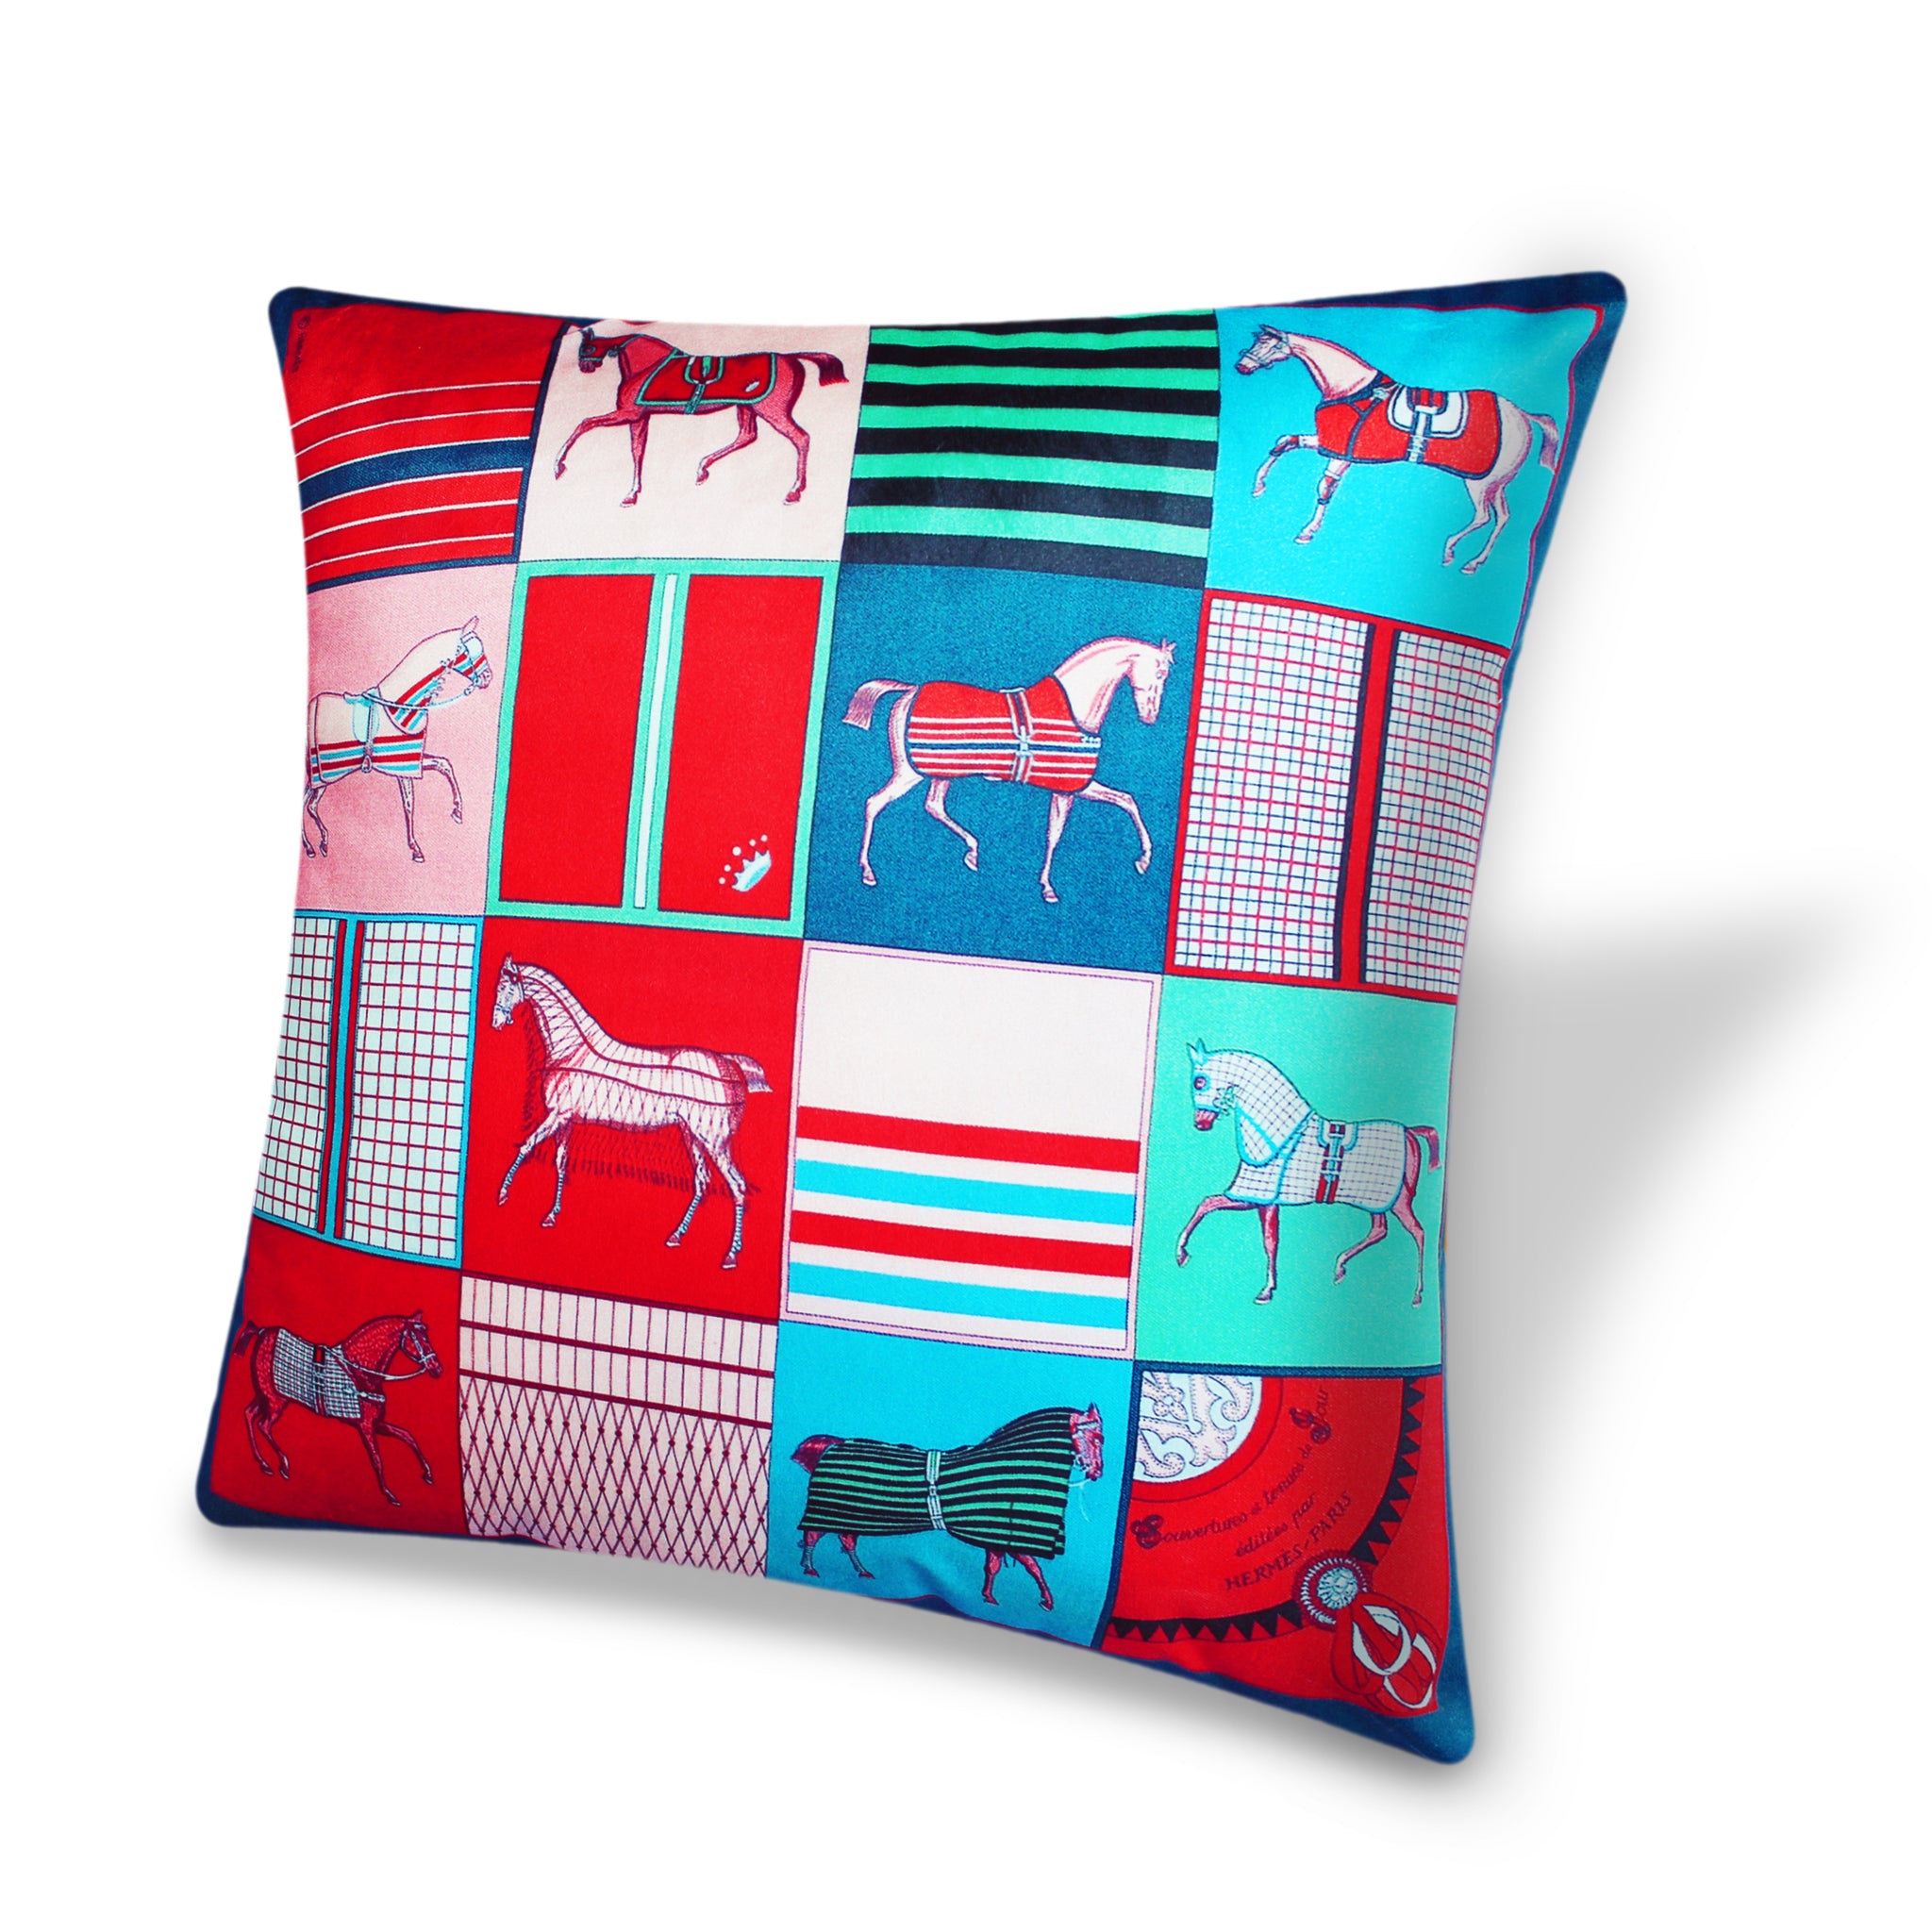 Red Velvet Cushion Cover, Hermes Inspired Horse Printed Decorative Pillow, Vintage Home Décor Throw Pillow Cover,  45 x 45 CM